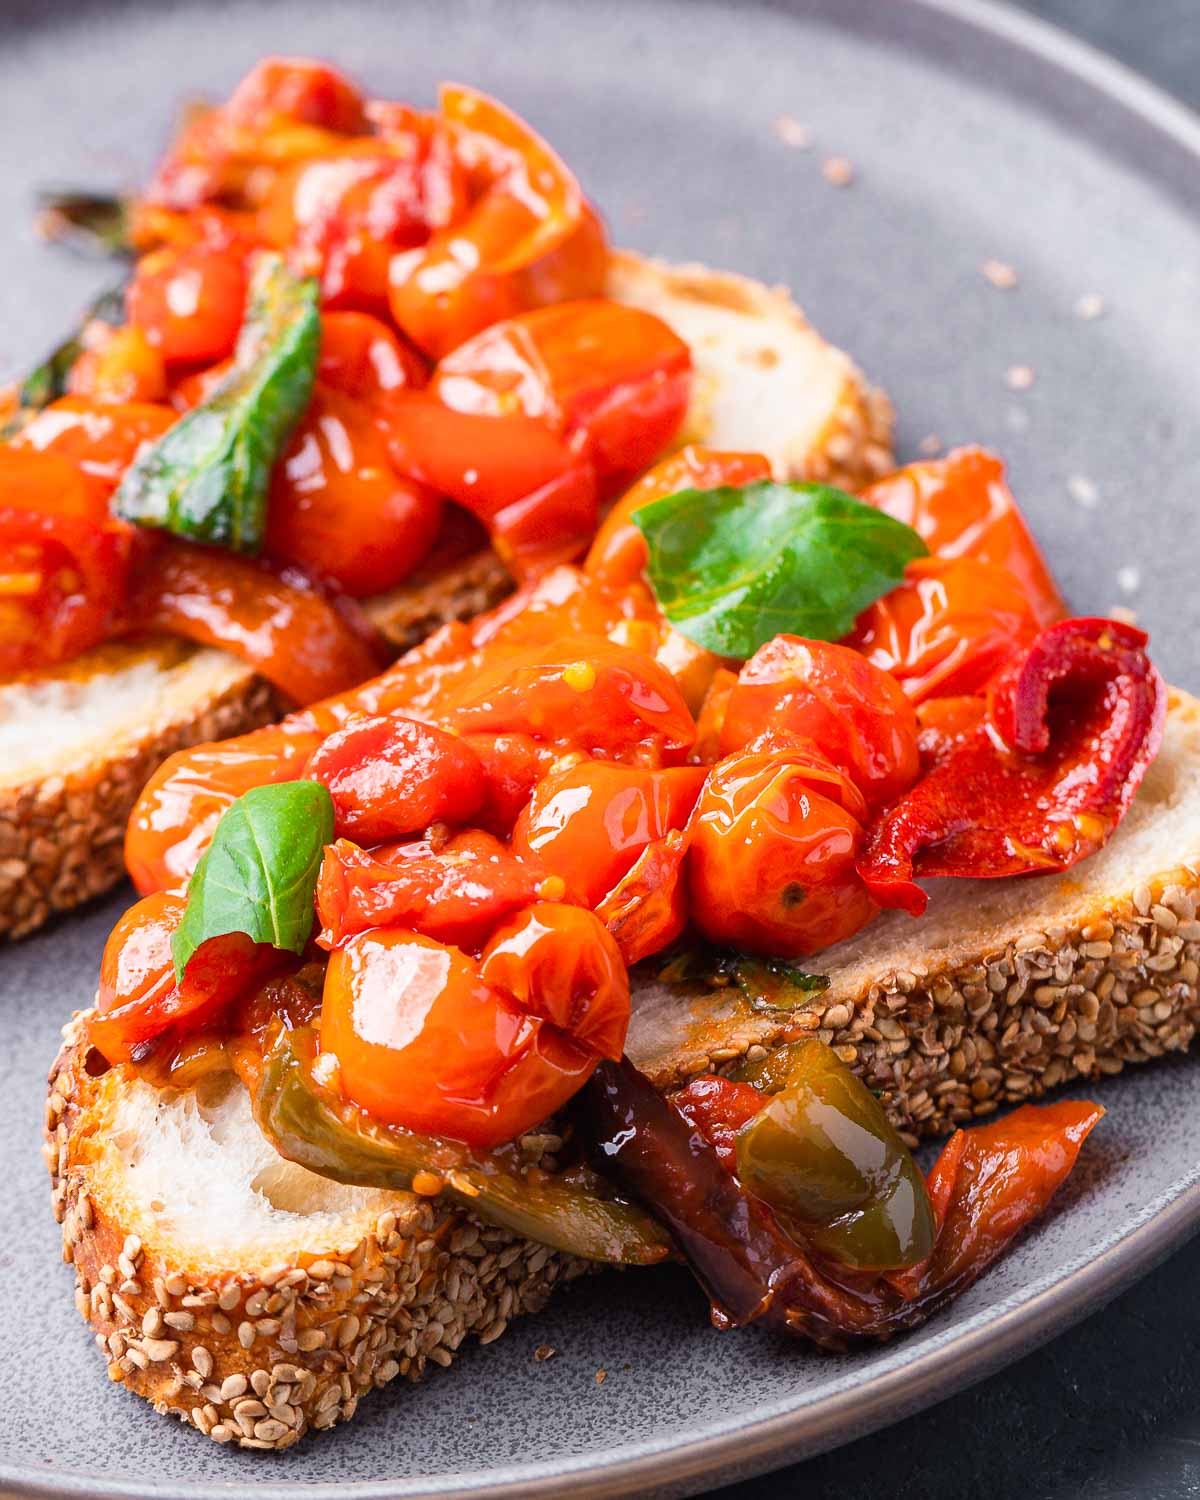 Cherry pepper spread on toasted bread pieces in grey plate.